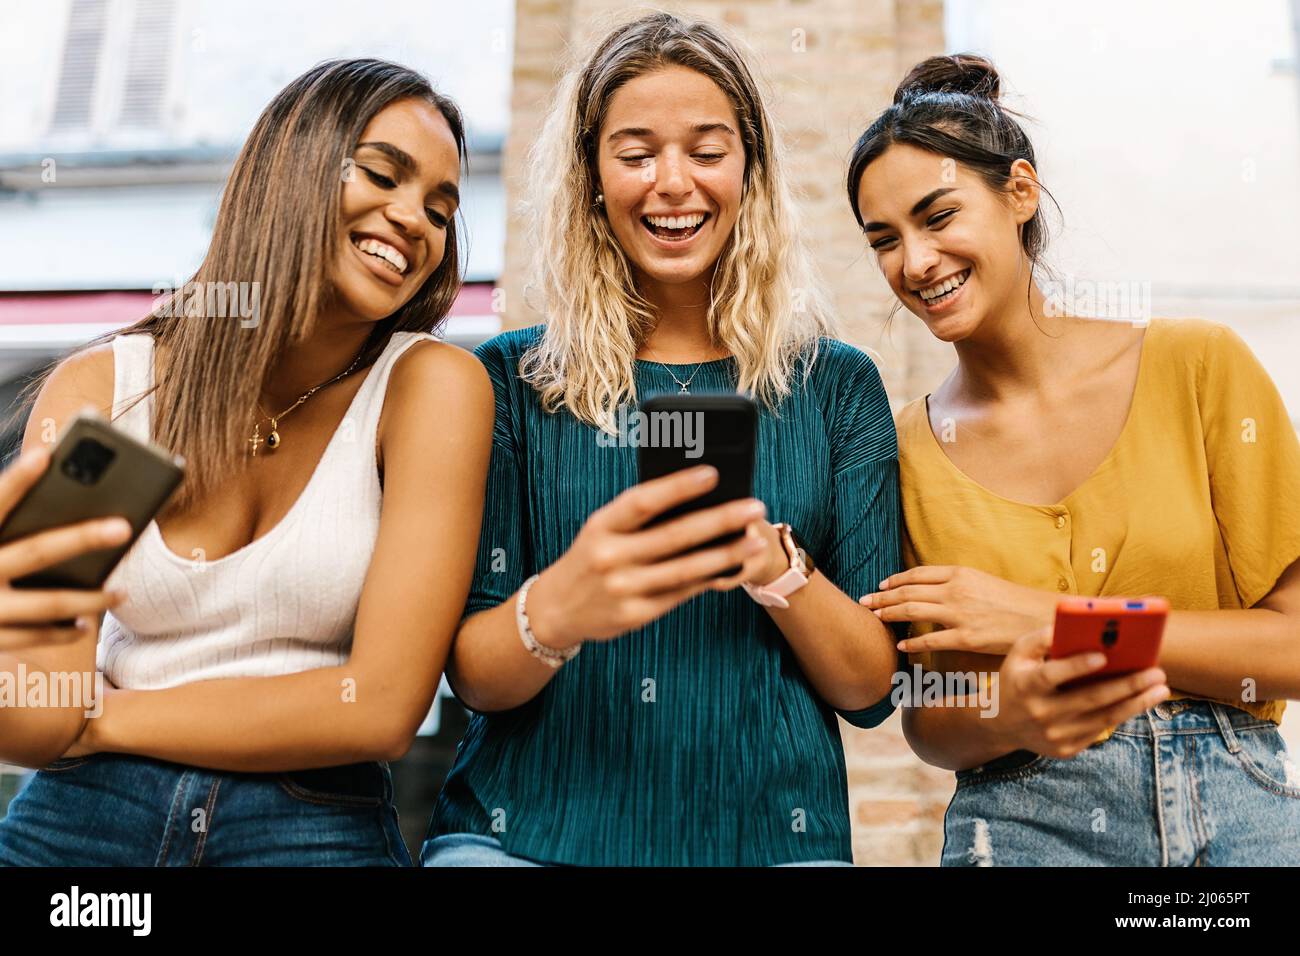 Smiling multiethnic female friends having fun together using mobile phone Stock Photo